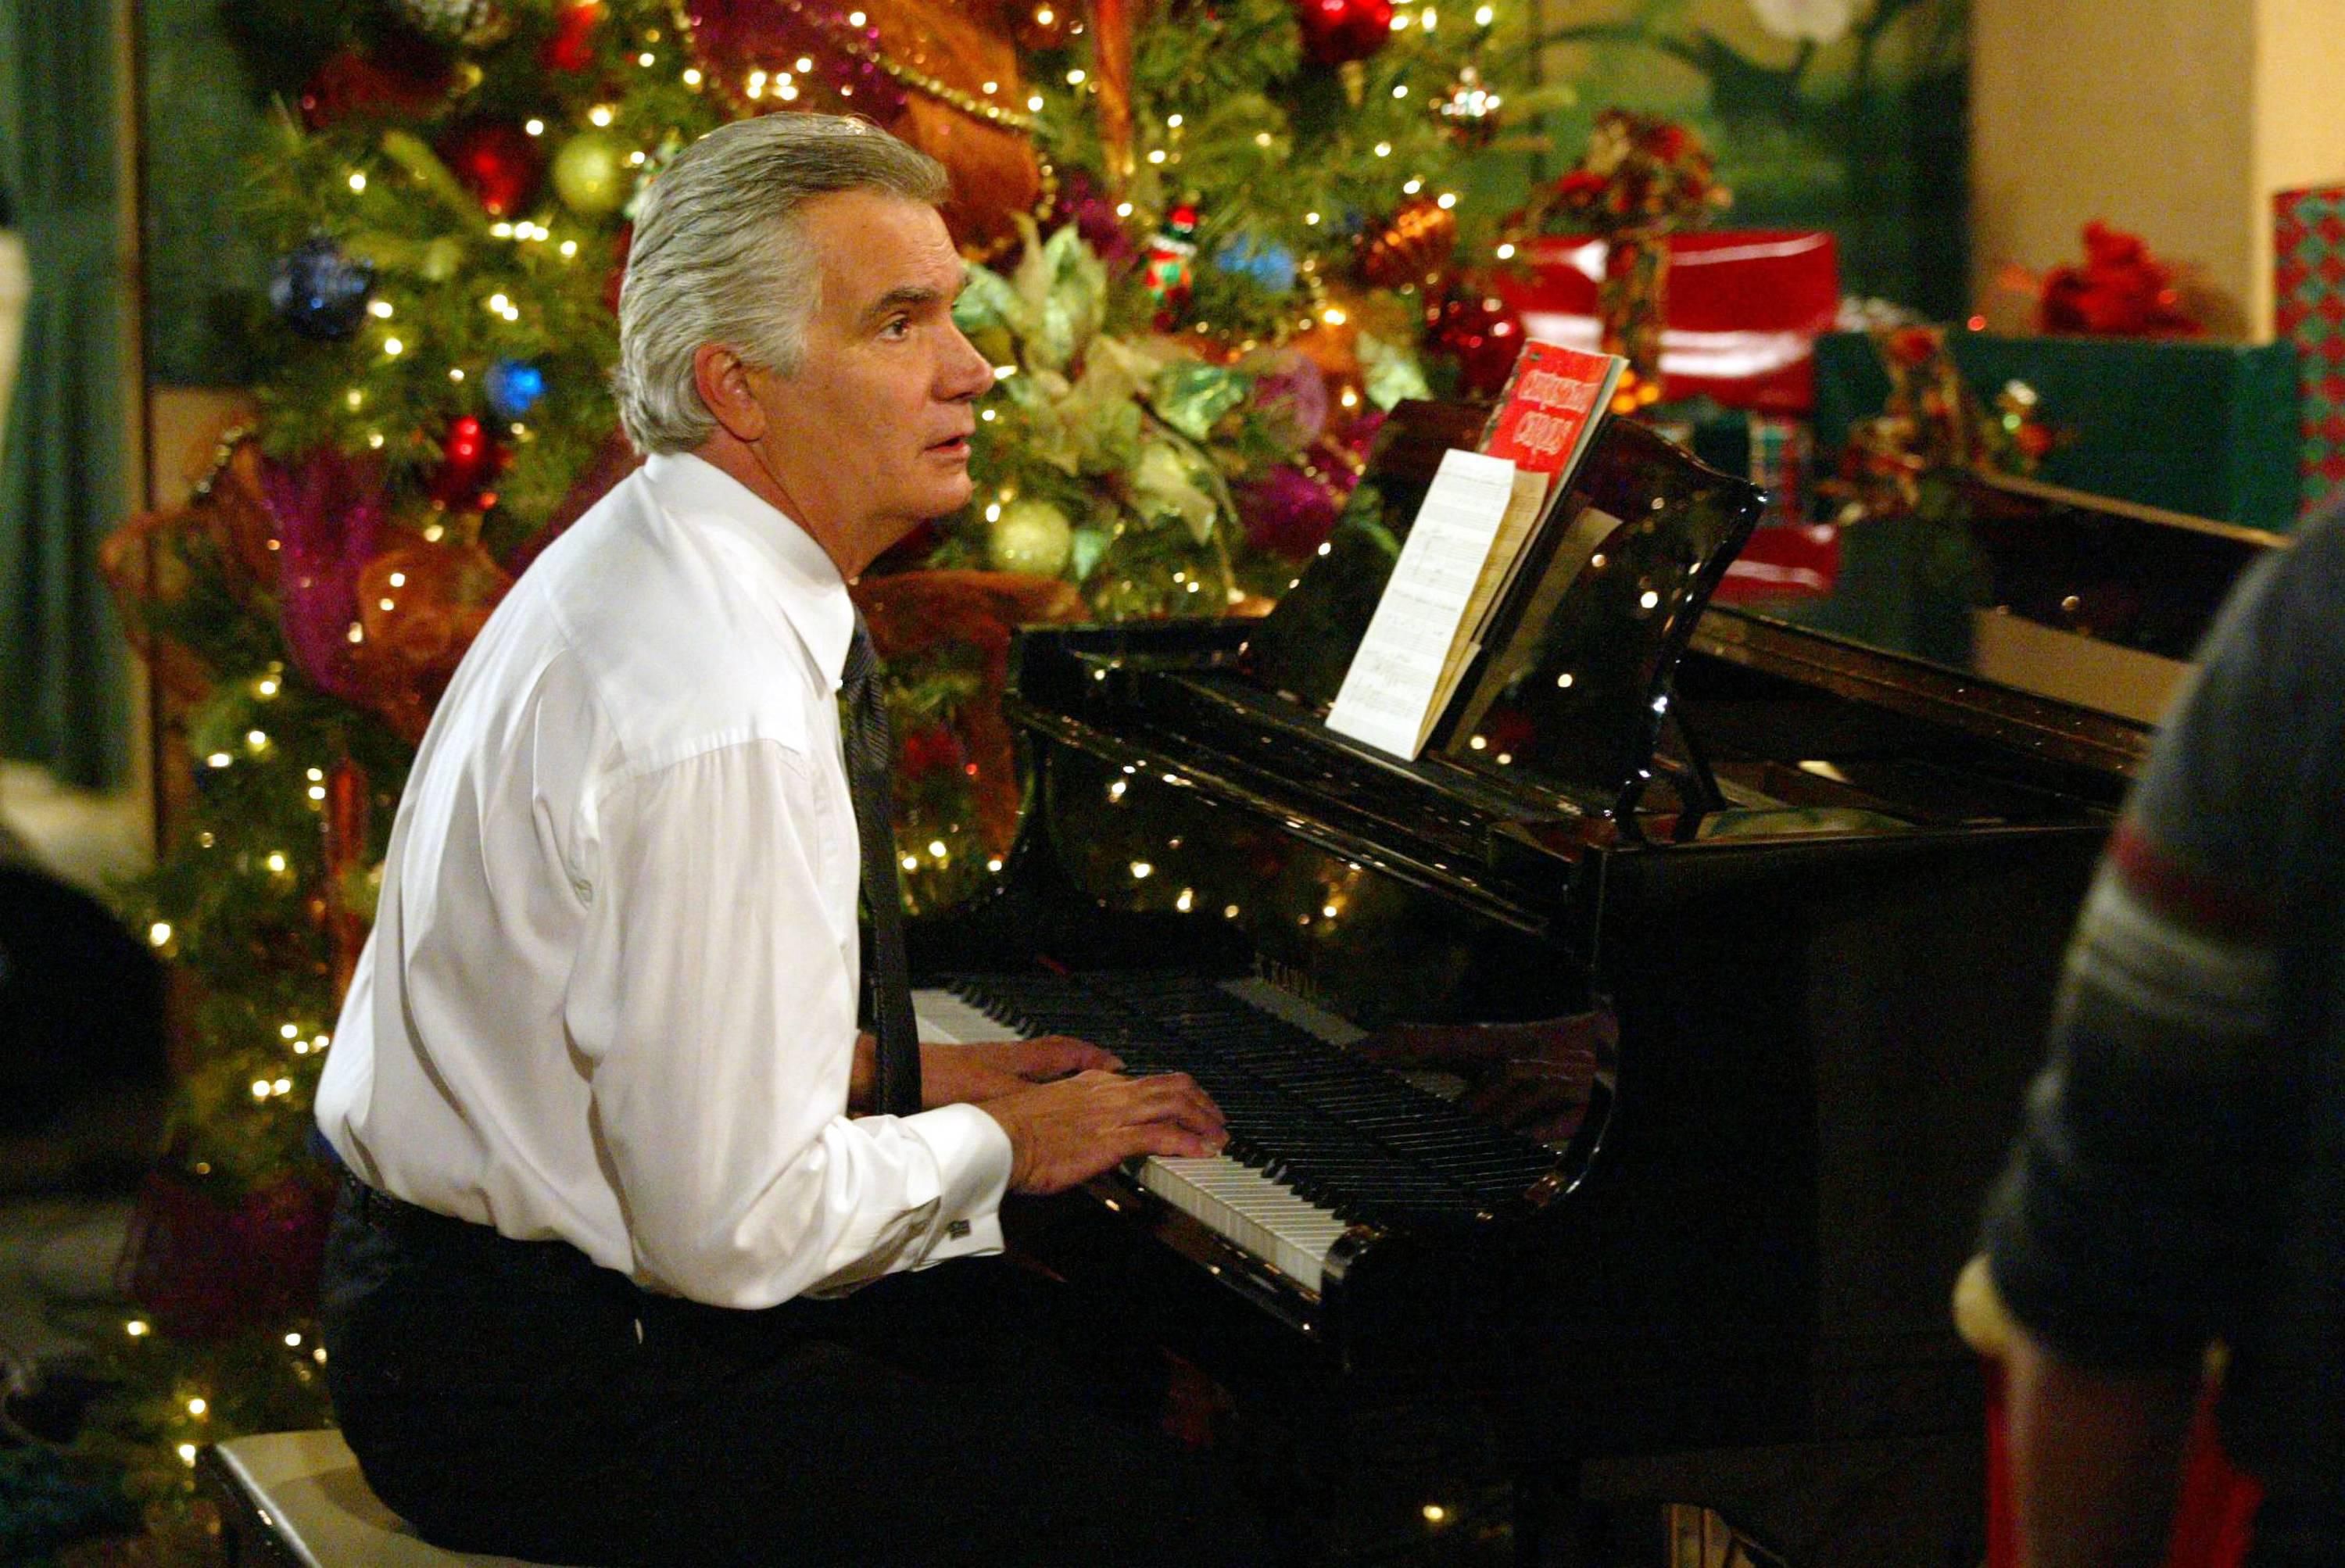 John McCook as Eric Forrester sitting down at a piano in front of the Forrester Christmas tree